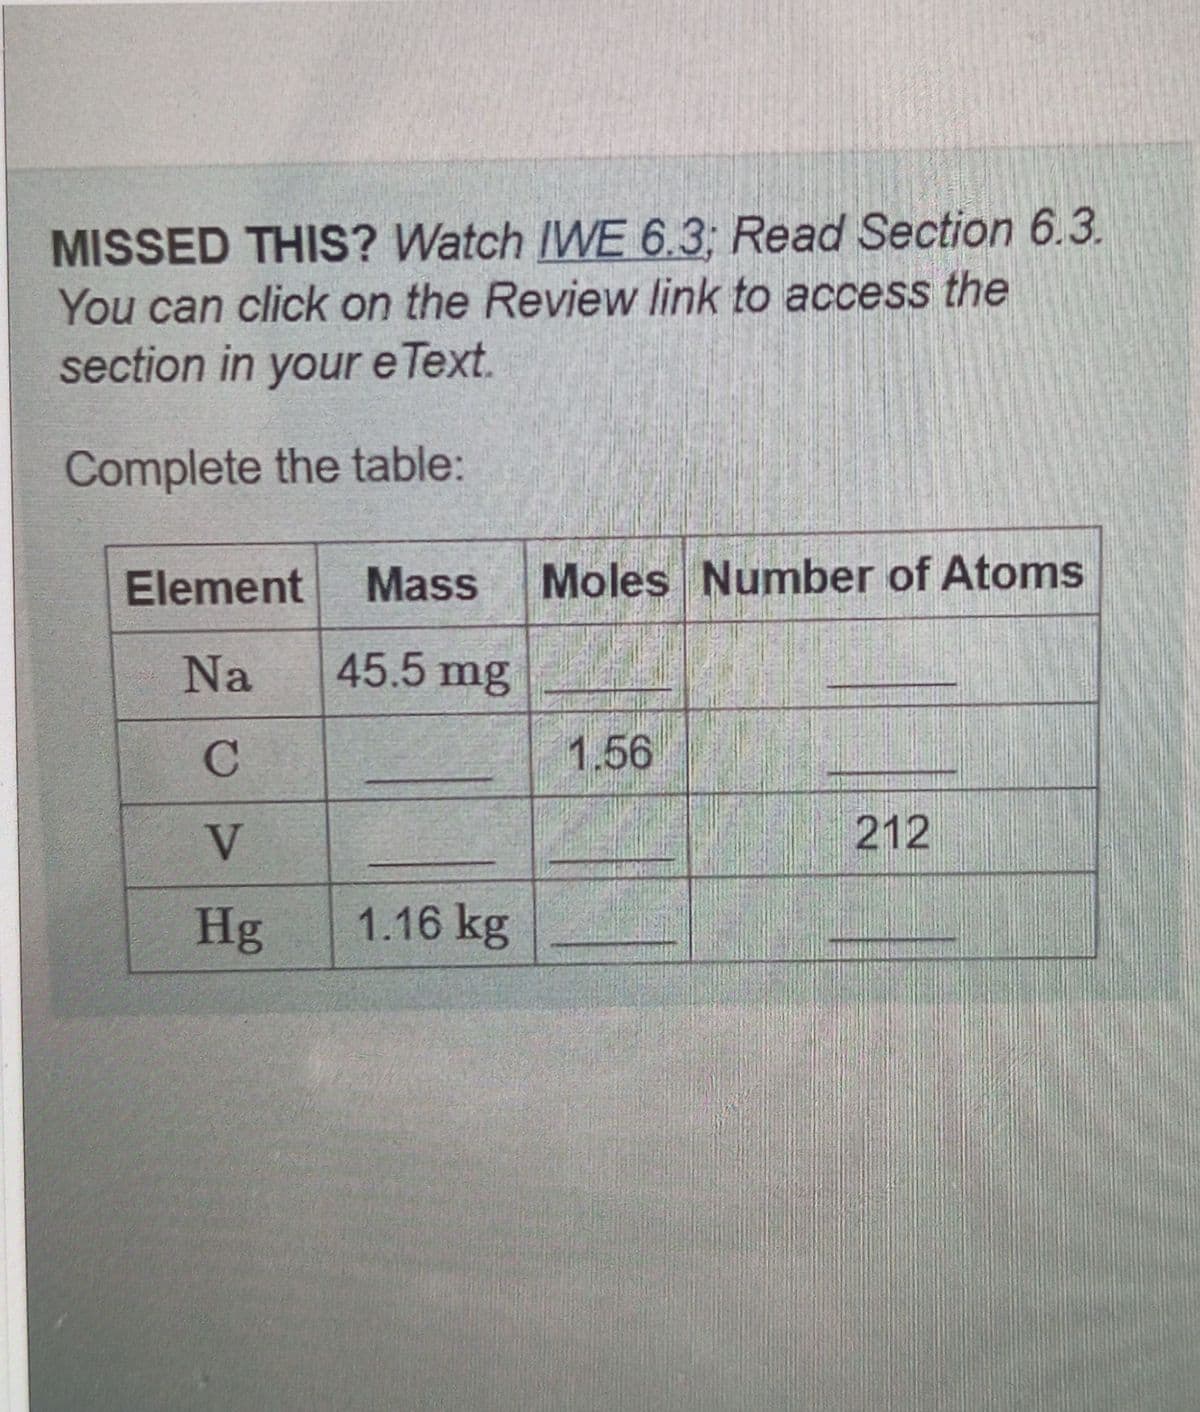 MISSED THIS? Watch IWE 6.3; Read Section 6.3.
You can click on the Review link to access the
section in your eText.
Complete the table:
Element Mass Moles Number of Atoms
Na
45.5 mg
C
1.56
212
V
Hg
1.16 kg